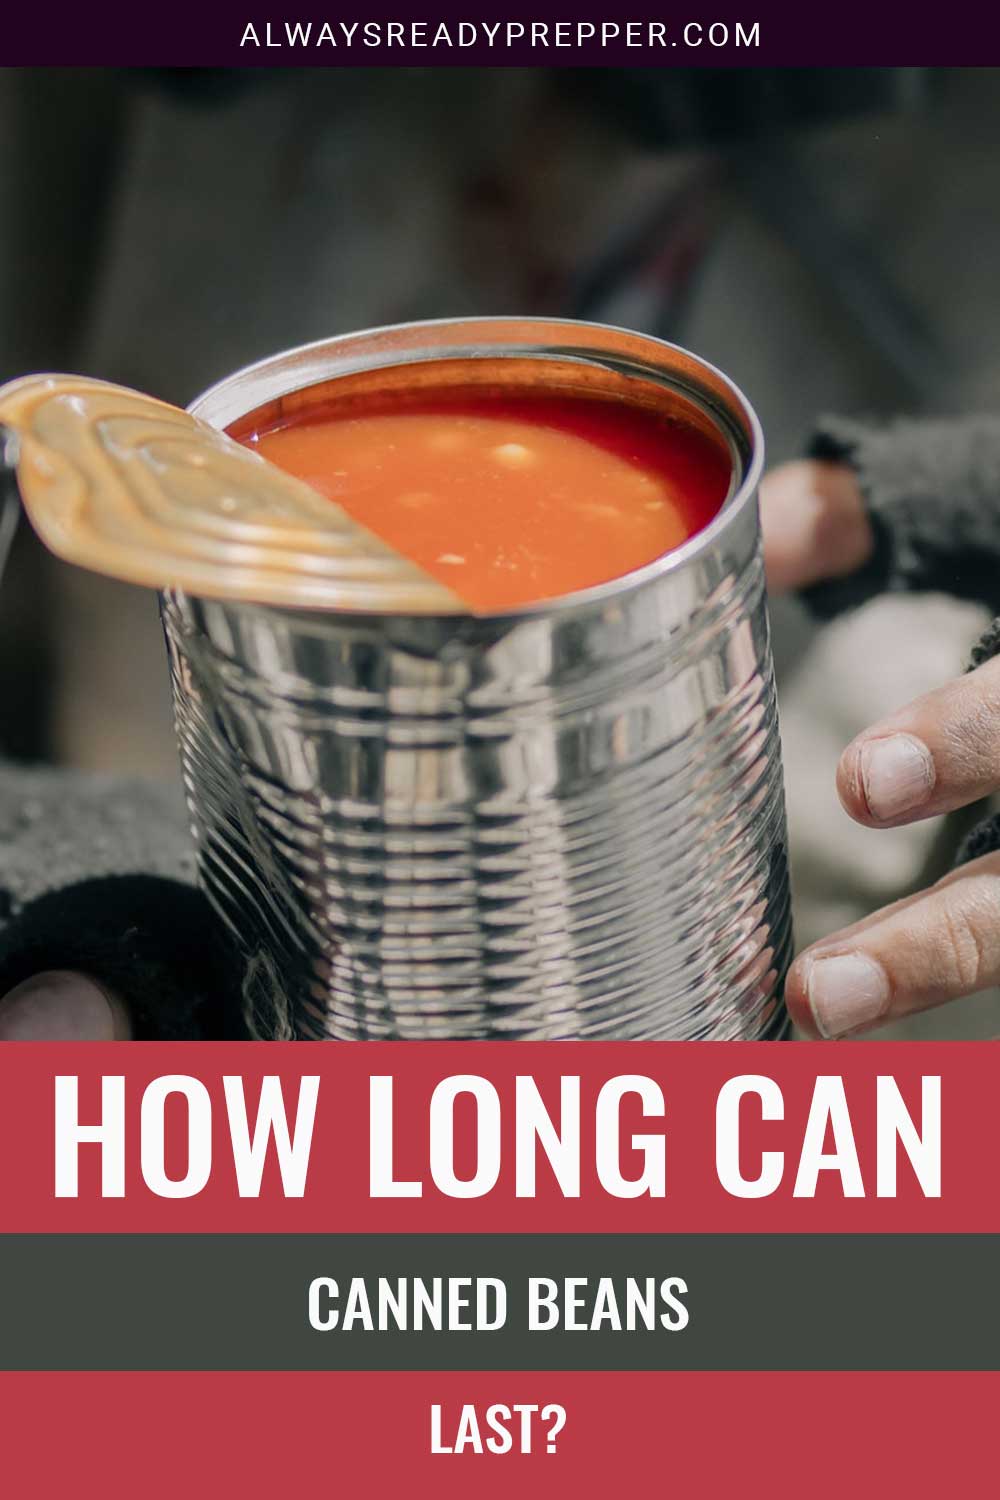 Canned bean lid opened - How Long Can Canned Beans Last?